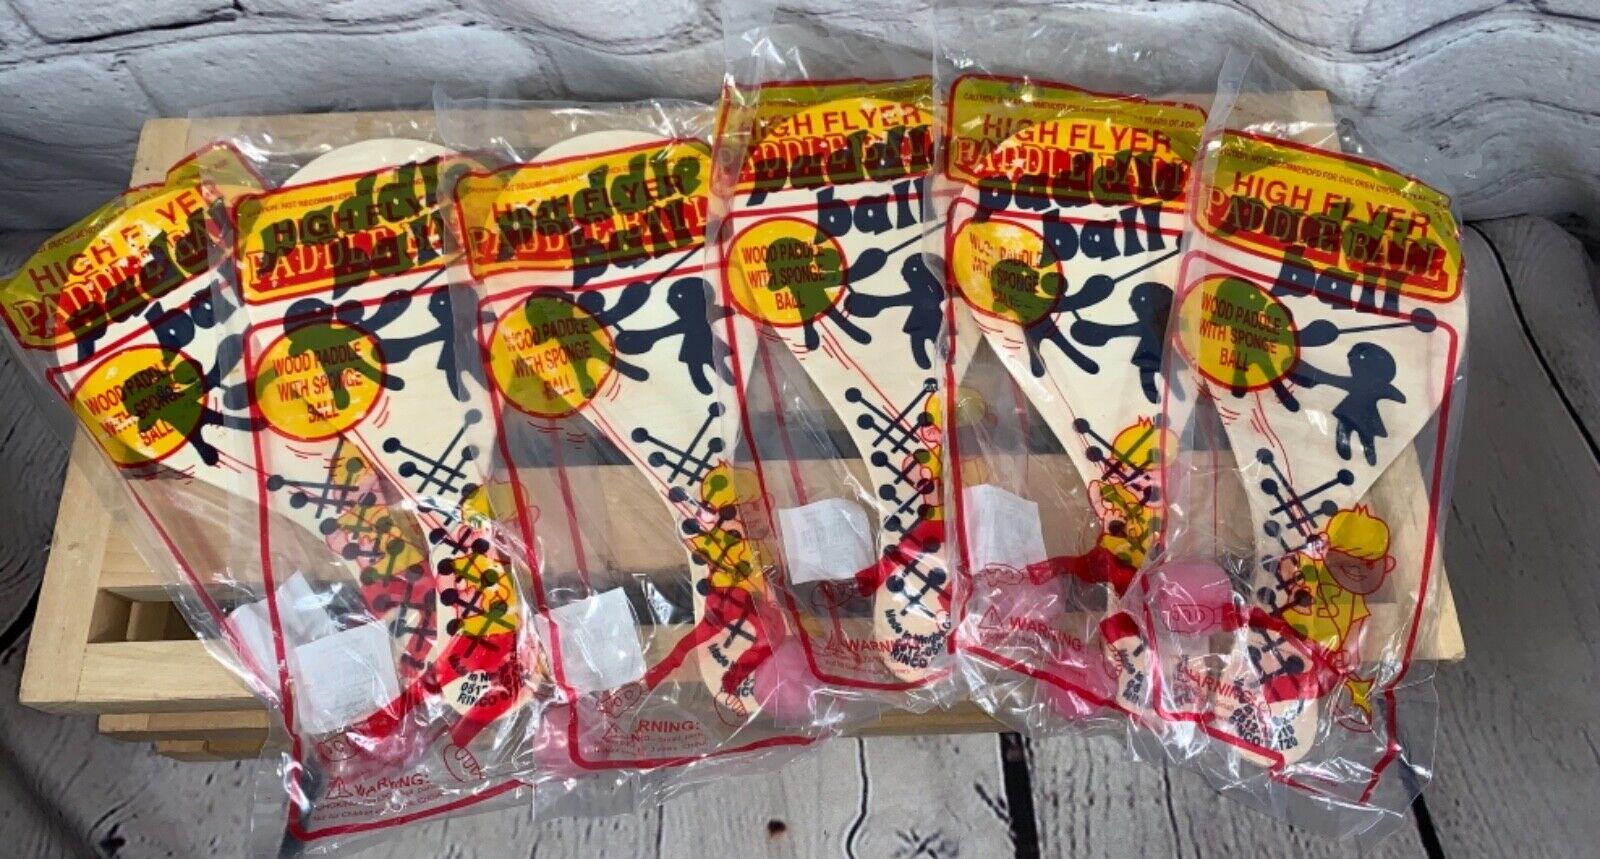 High Flyer Paddle Ball Game lot of 6 new in packaging  High flyer Does Not Apply